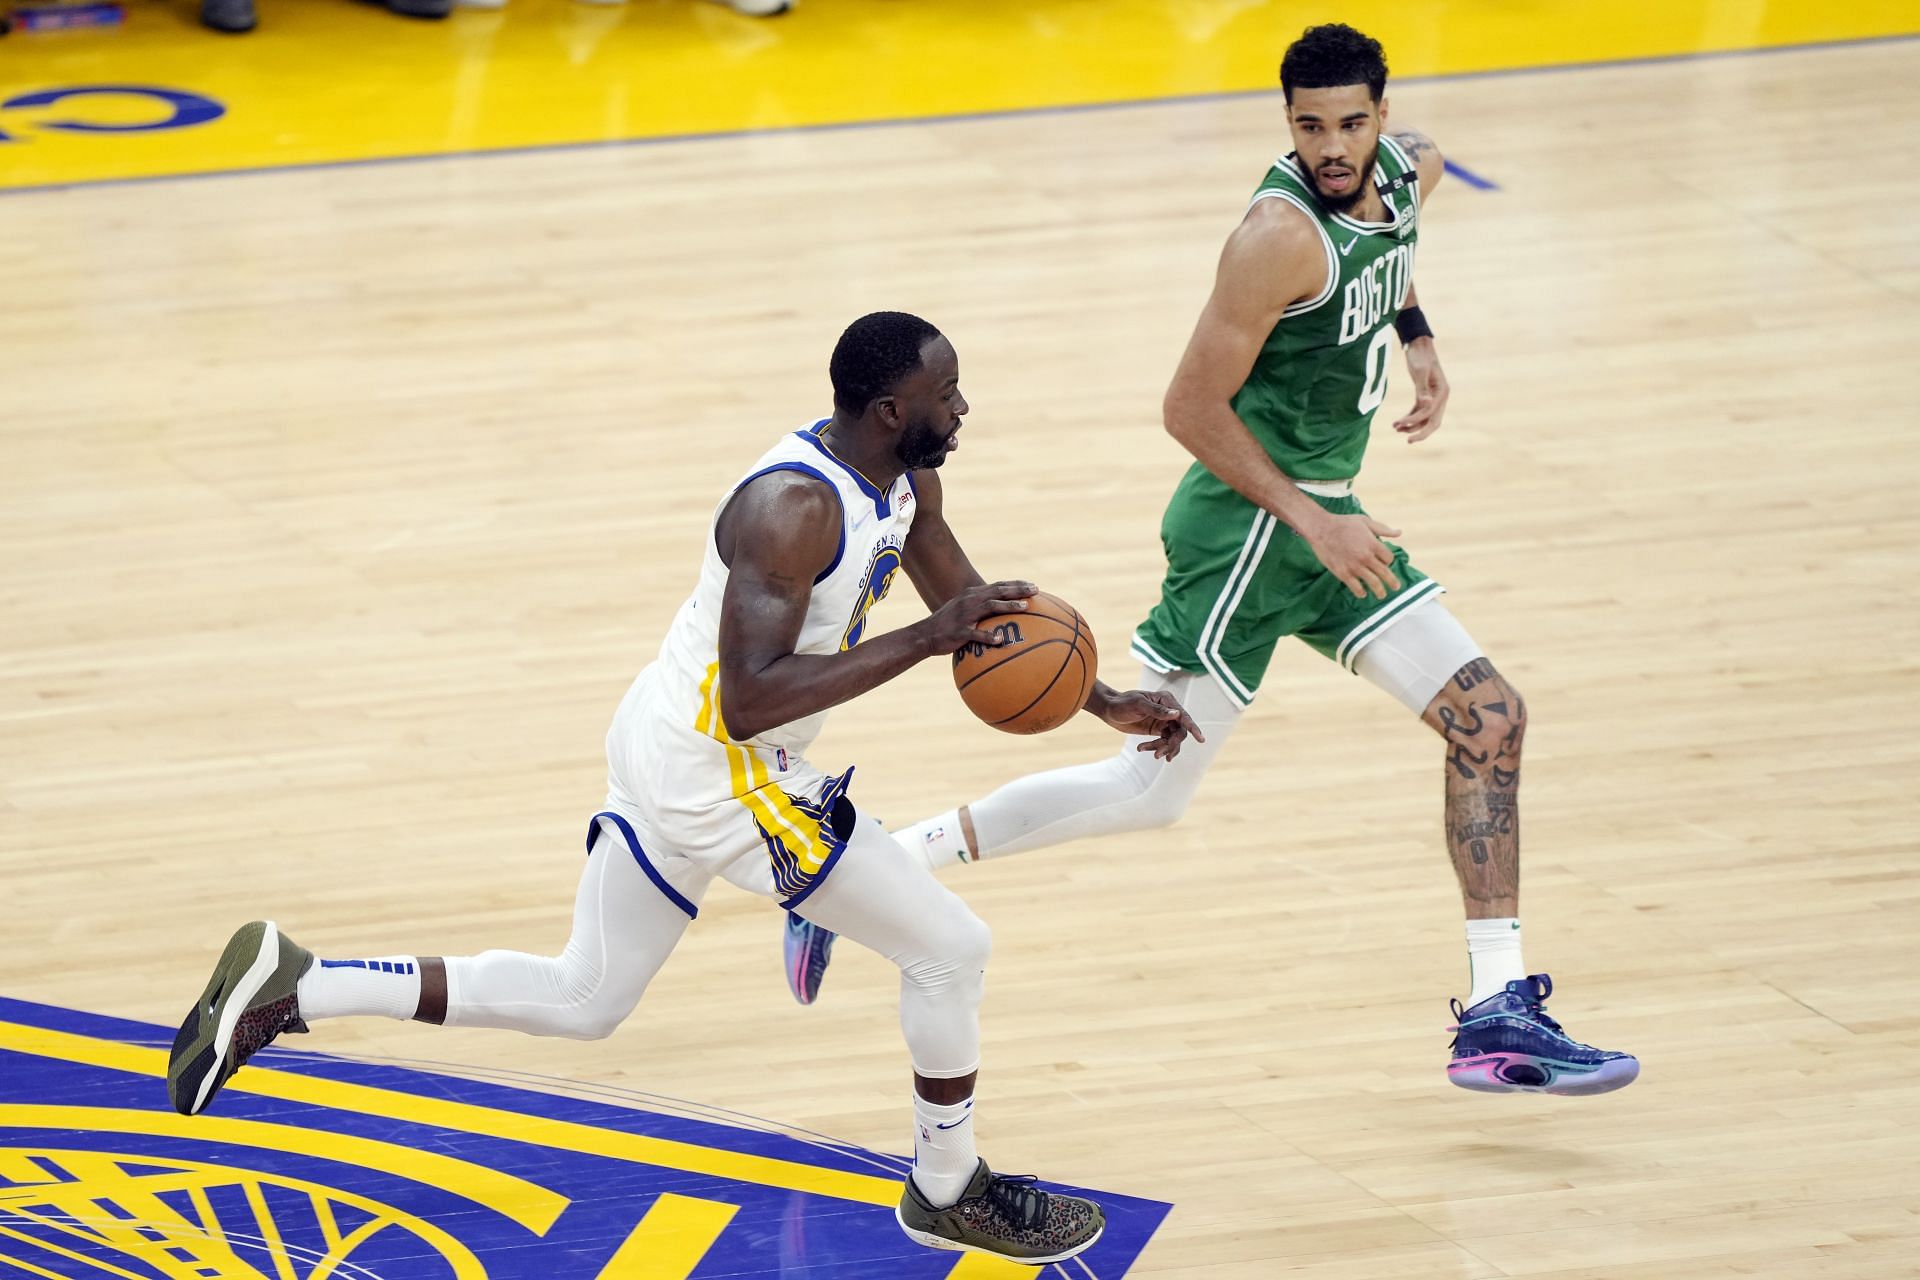 Draymond Green #23 of the Golden State Warriors dribbles against Jayson Tatum #0 of the Boston Celtics during the third quarter in Game One of the 2022 NBA Finals at Chase Center on June 02, 2022 in San Francisco, California.